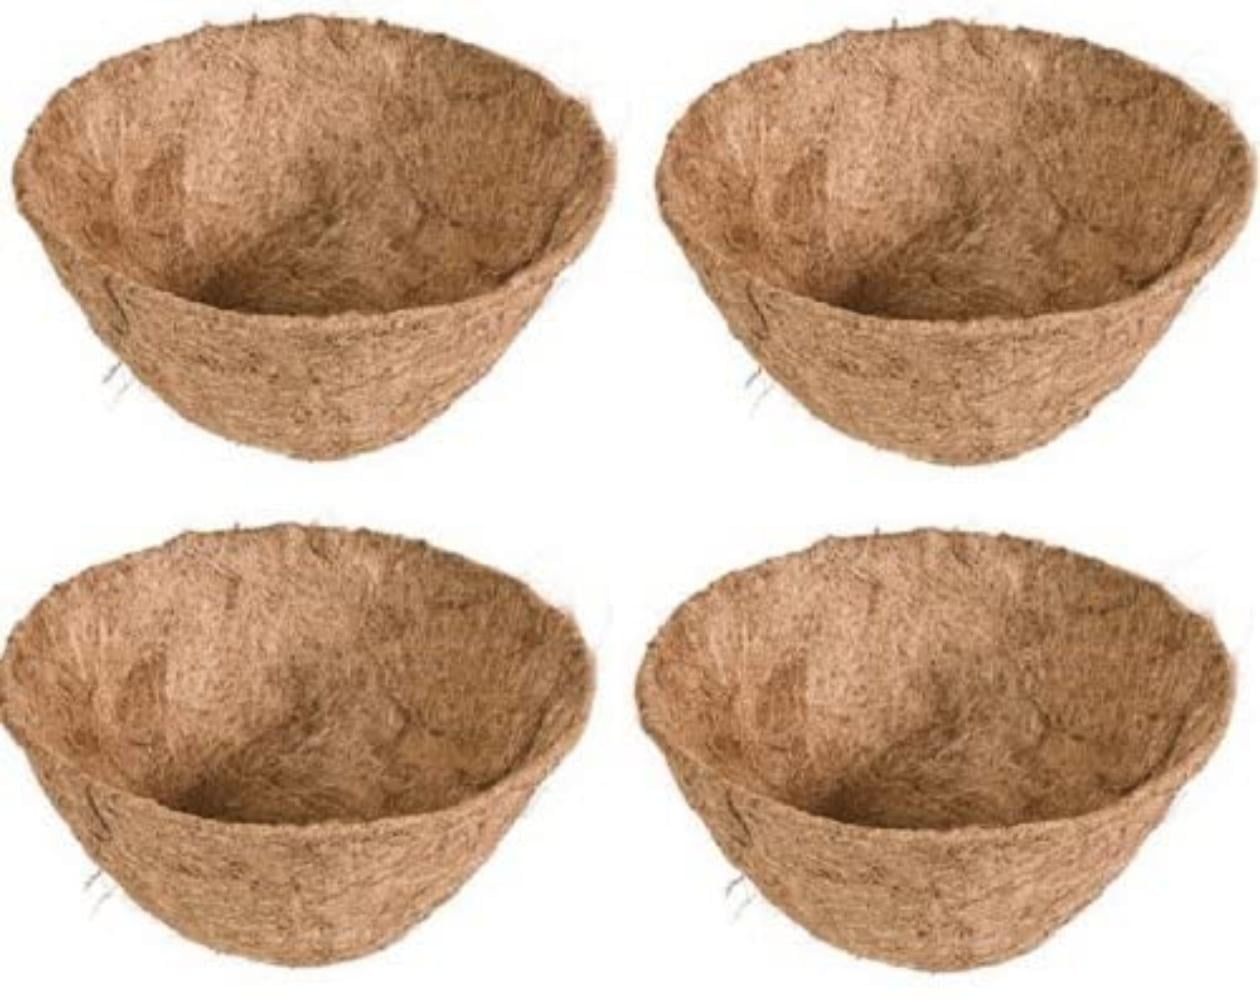 12 ea Panacea Products 84166 10" Diameter Round Planter Replacement Coco Liners 